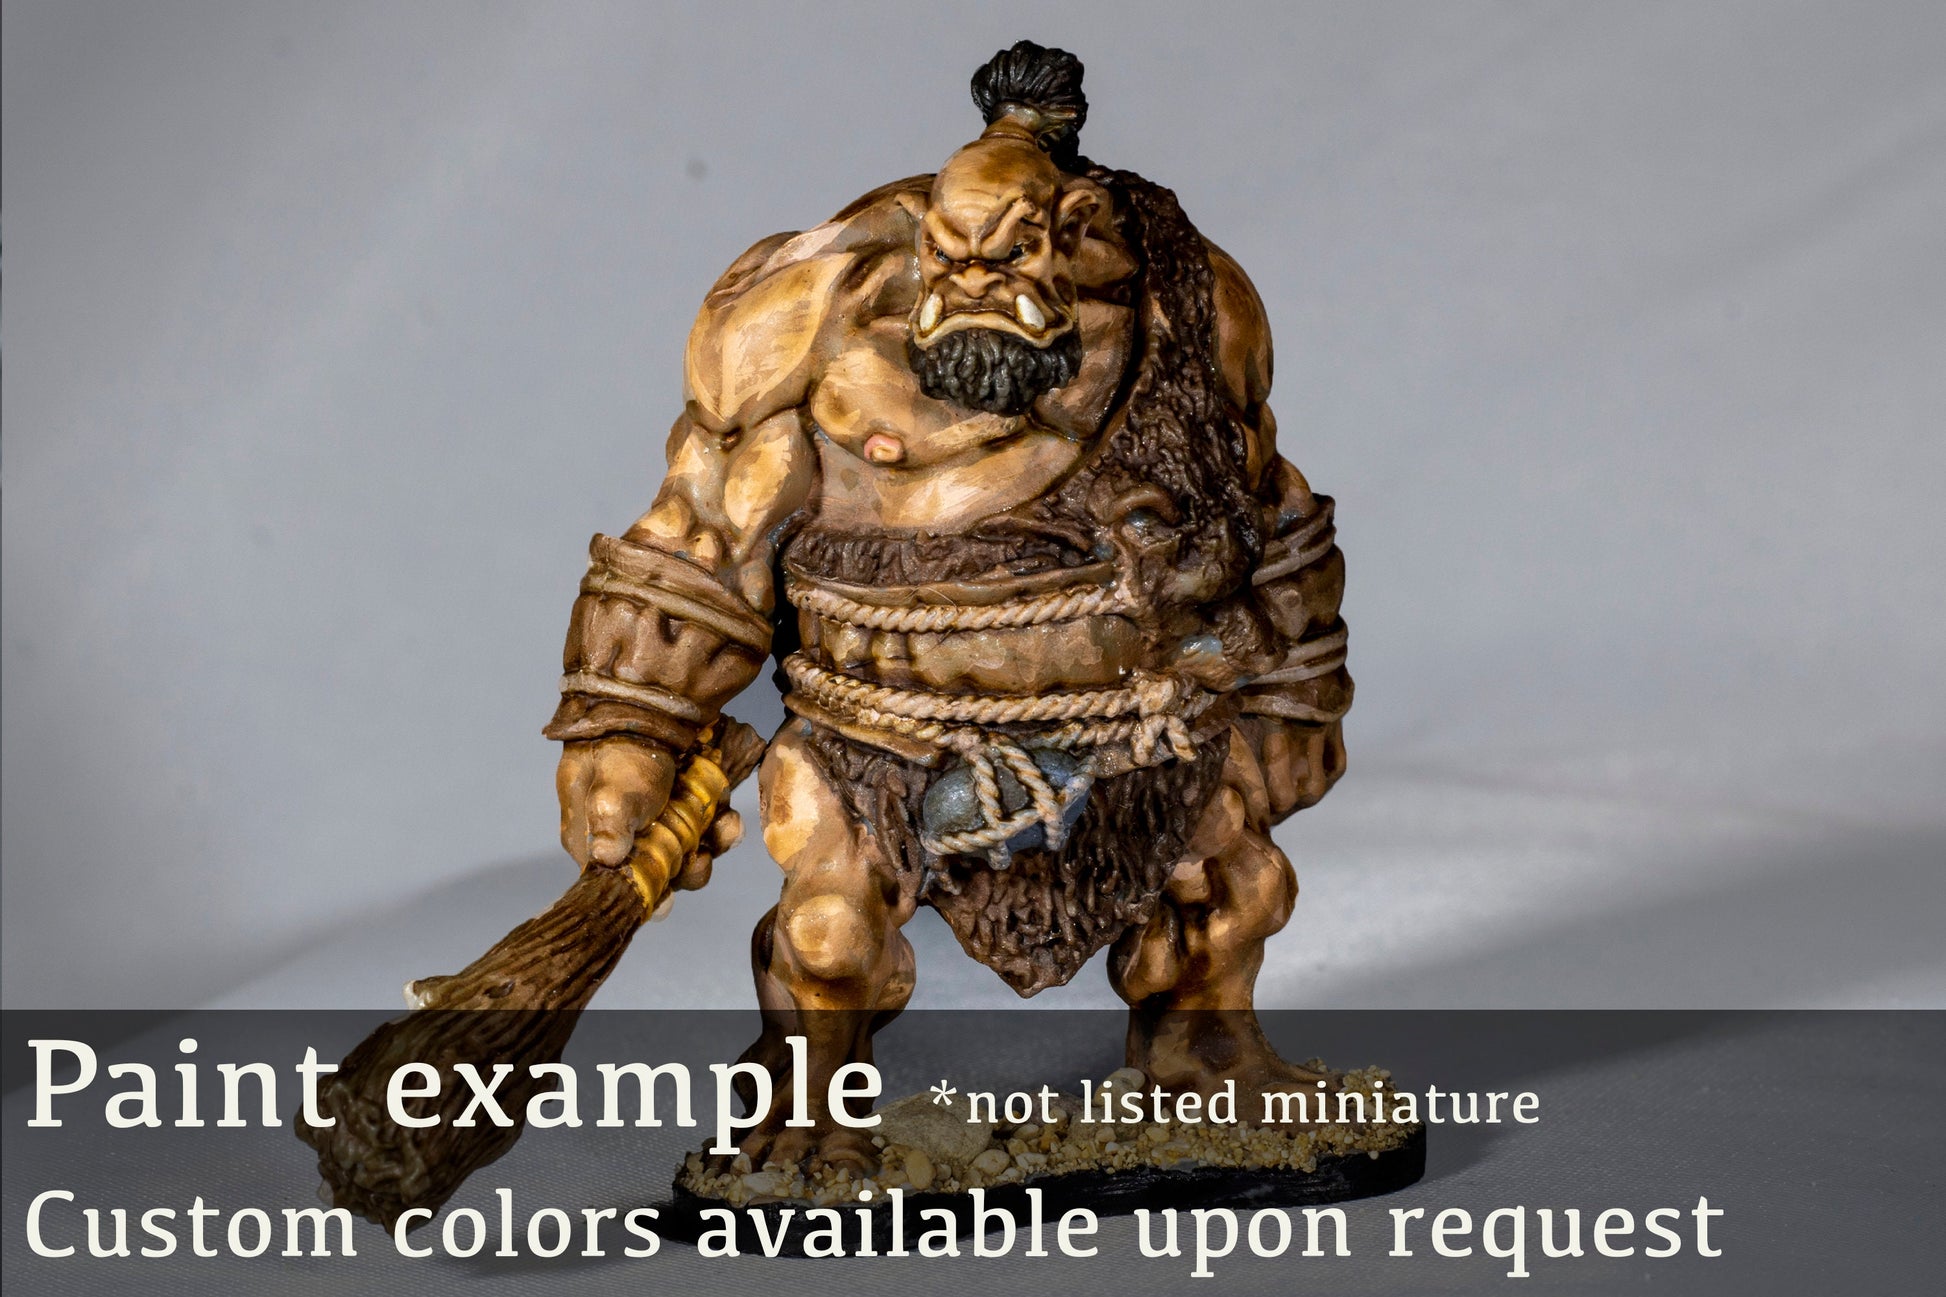 Chuul - Archvillain Games Printed Miniature | Dungeons & Dragons | Pathfinder | Tabletop